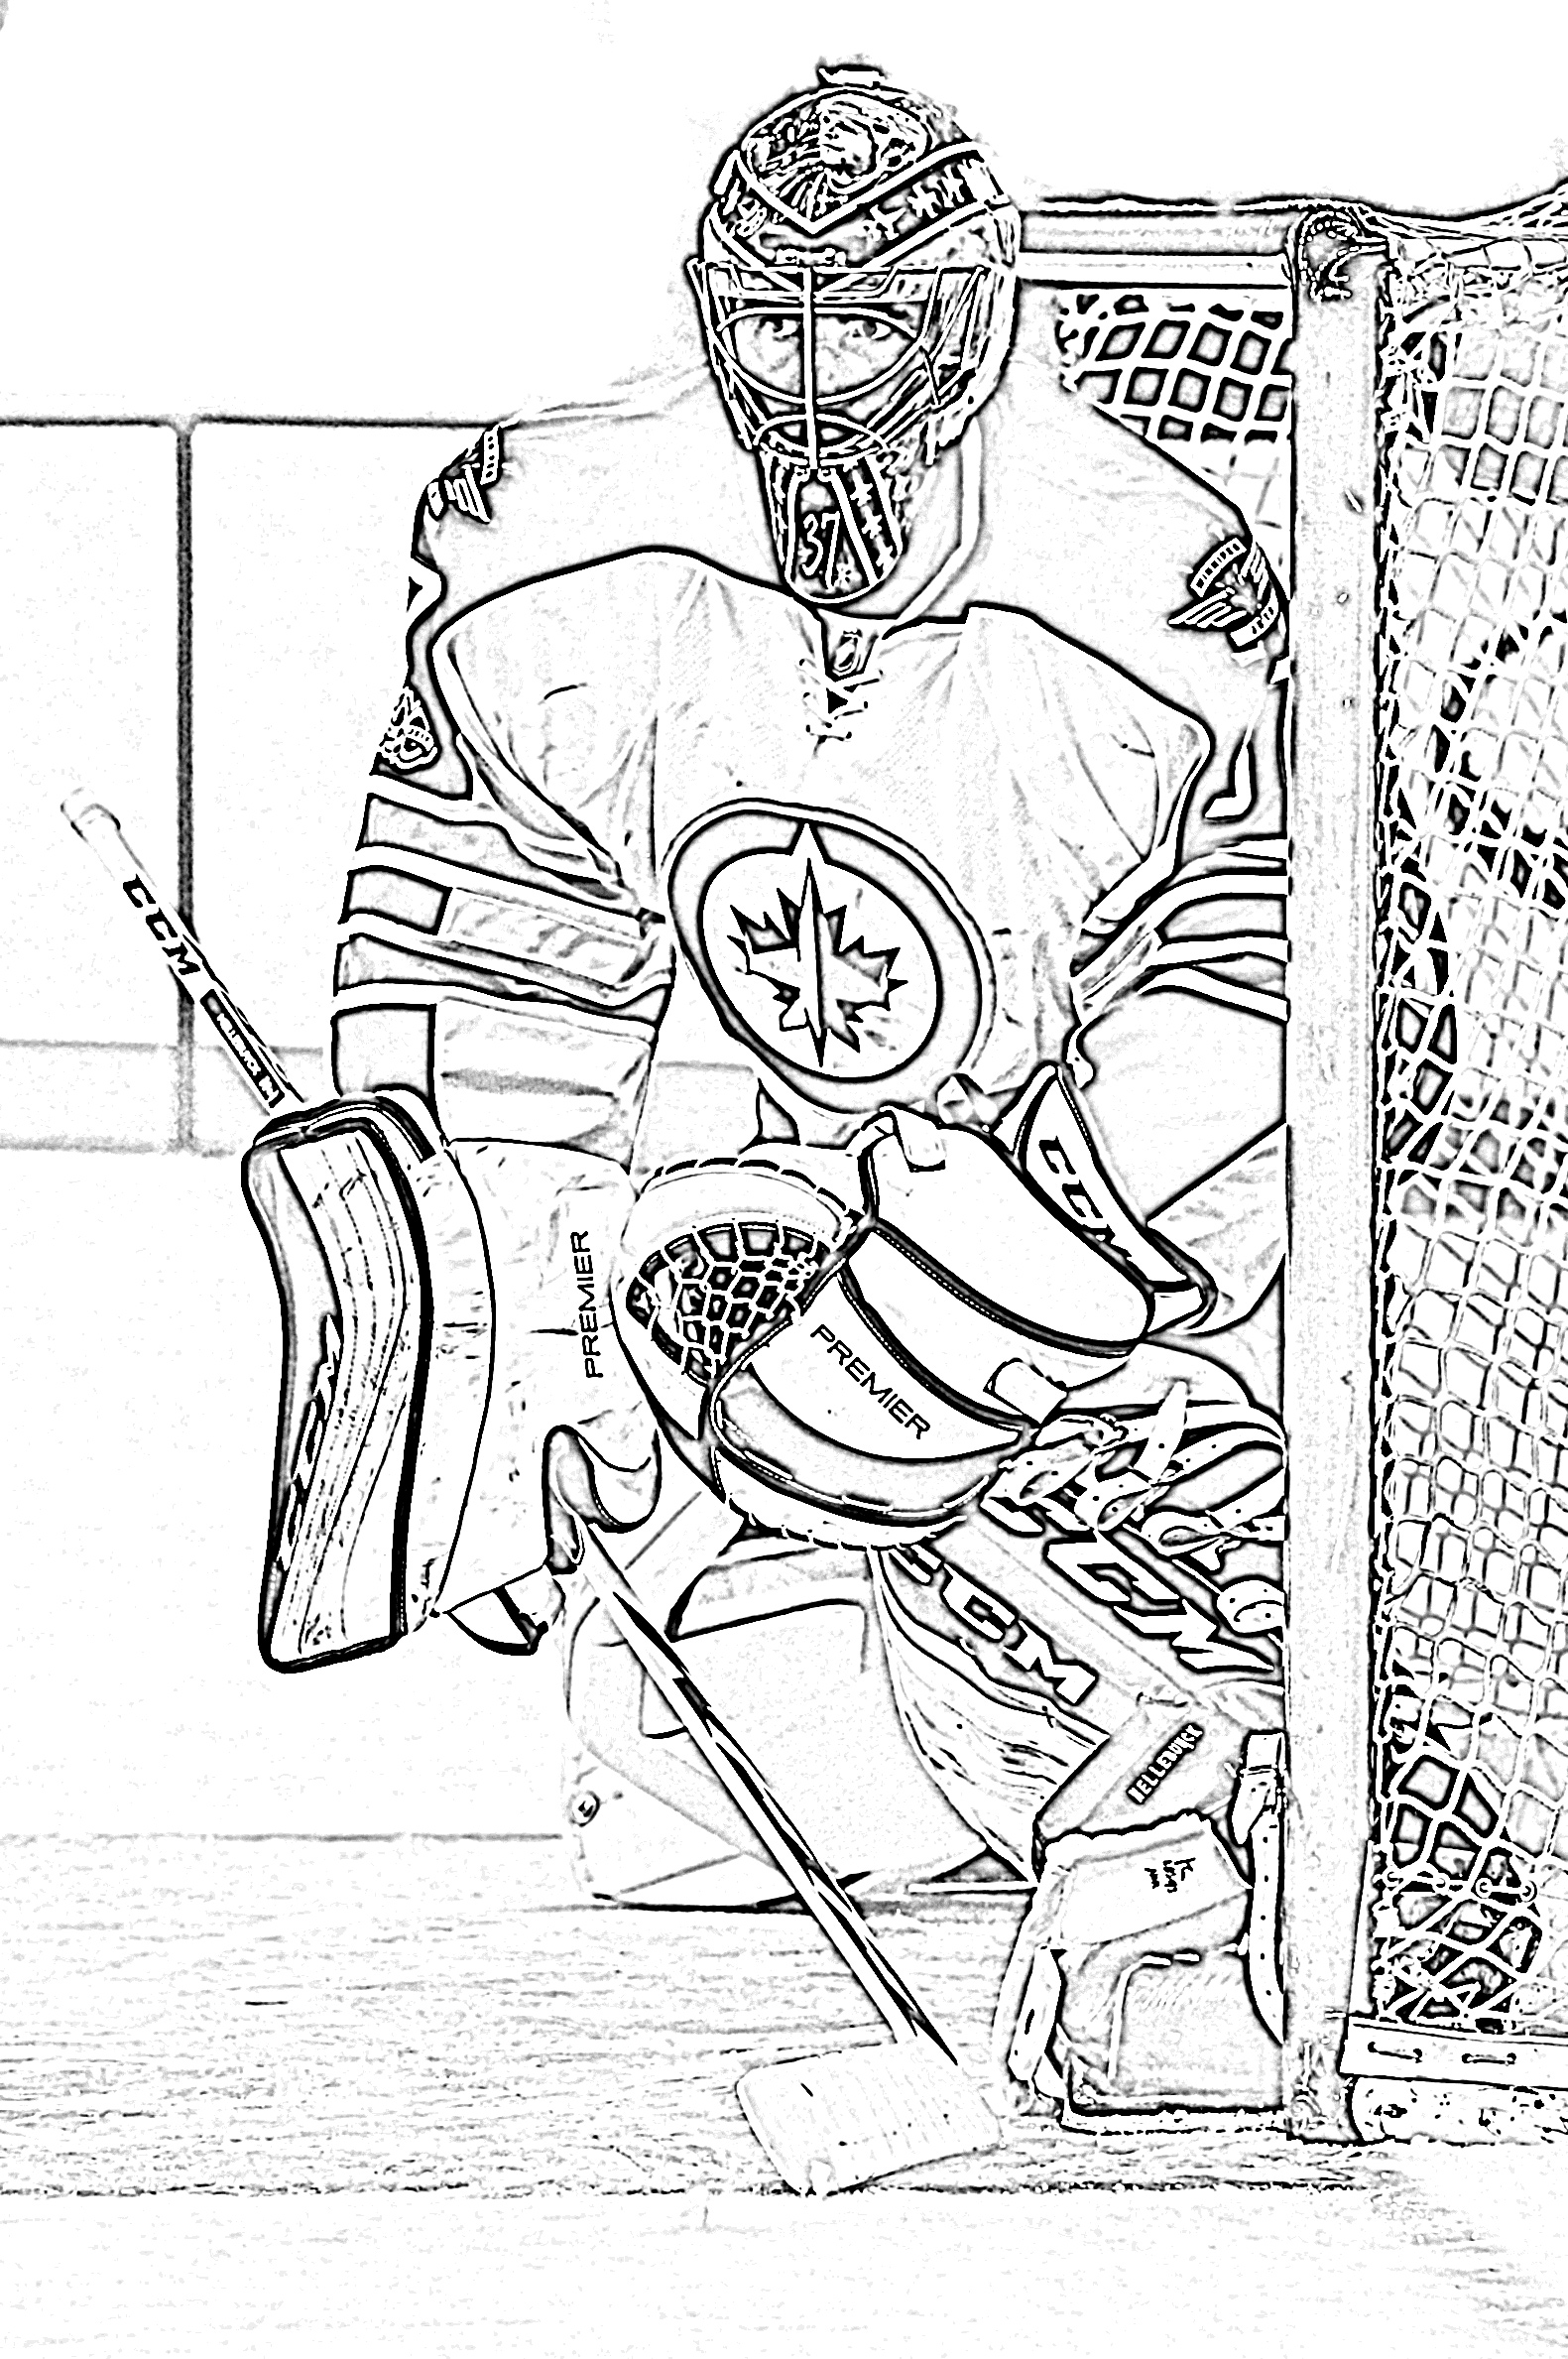 11 Free Hockey Coloring Pages For Kids BestAppsForKids